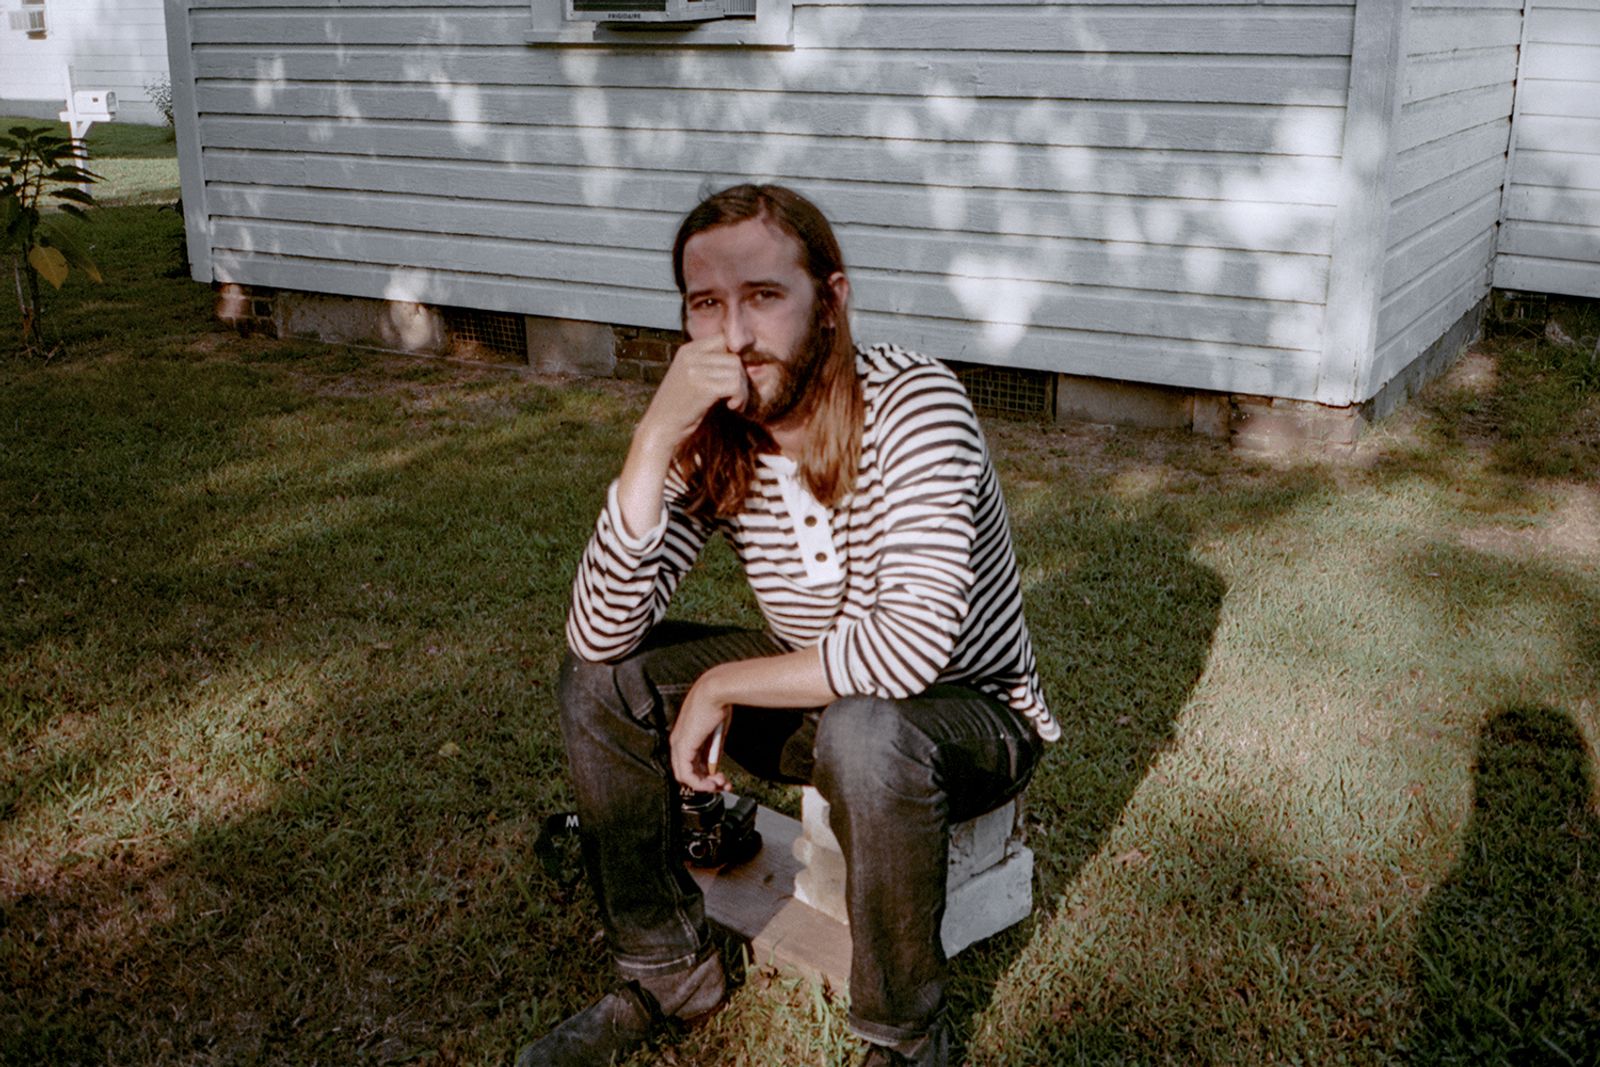 © Fred Mitchell - Image from the A Country Boy Cant Survive photography project